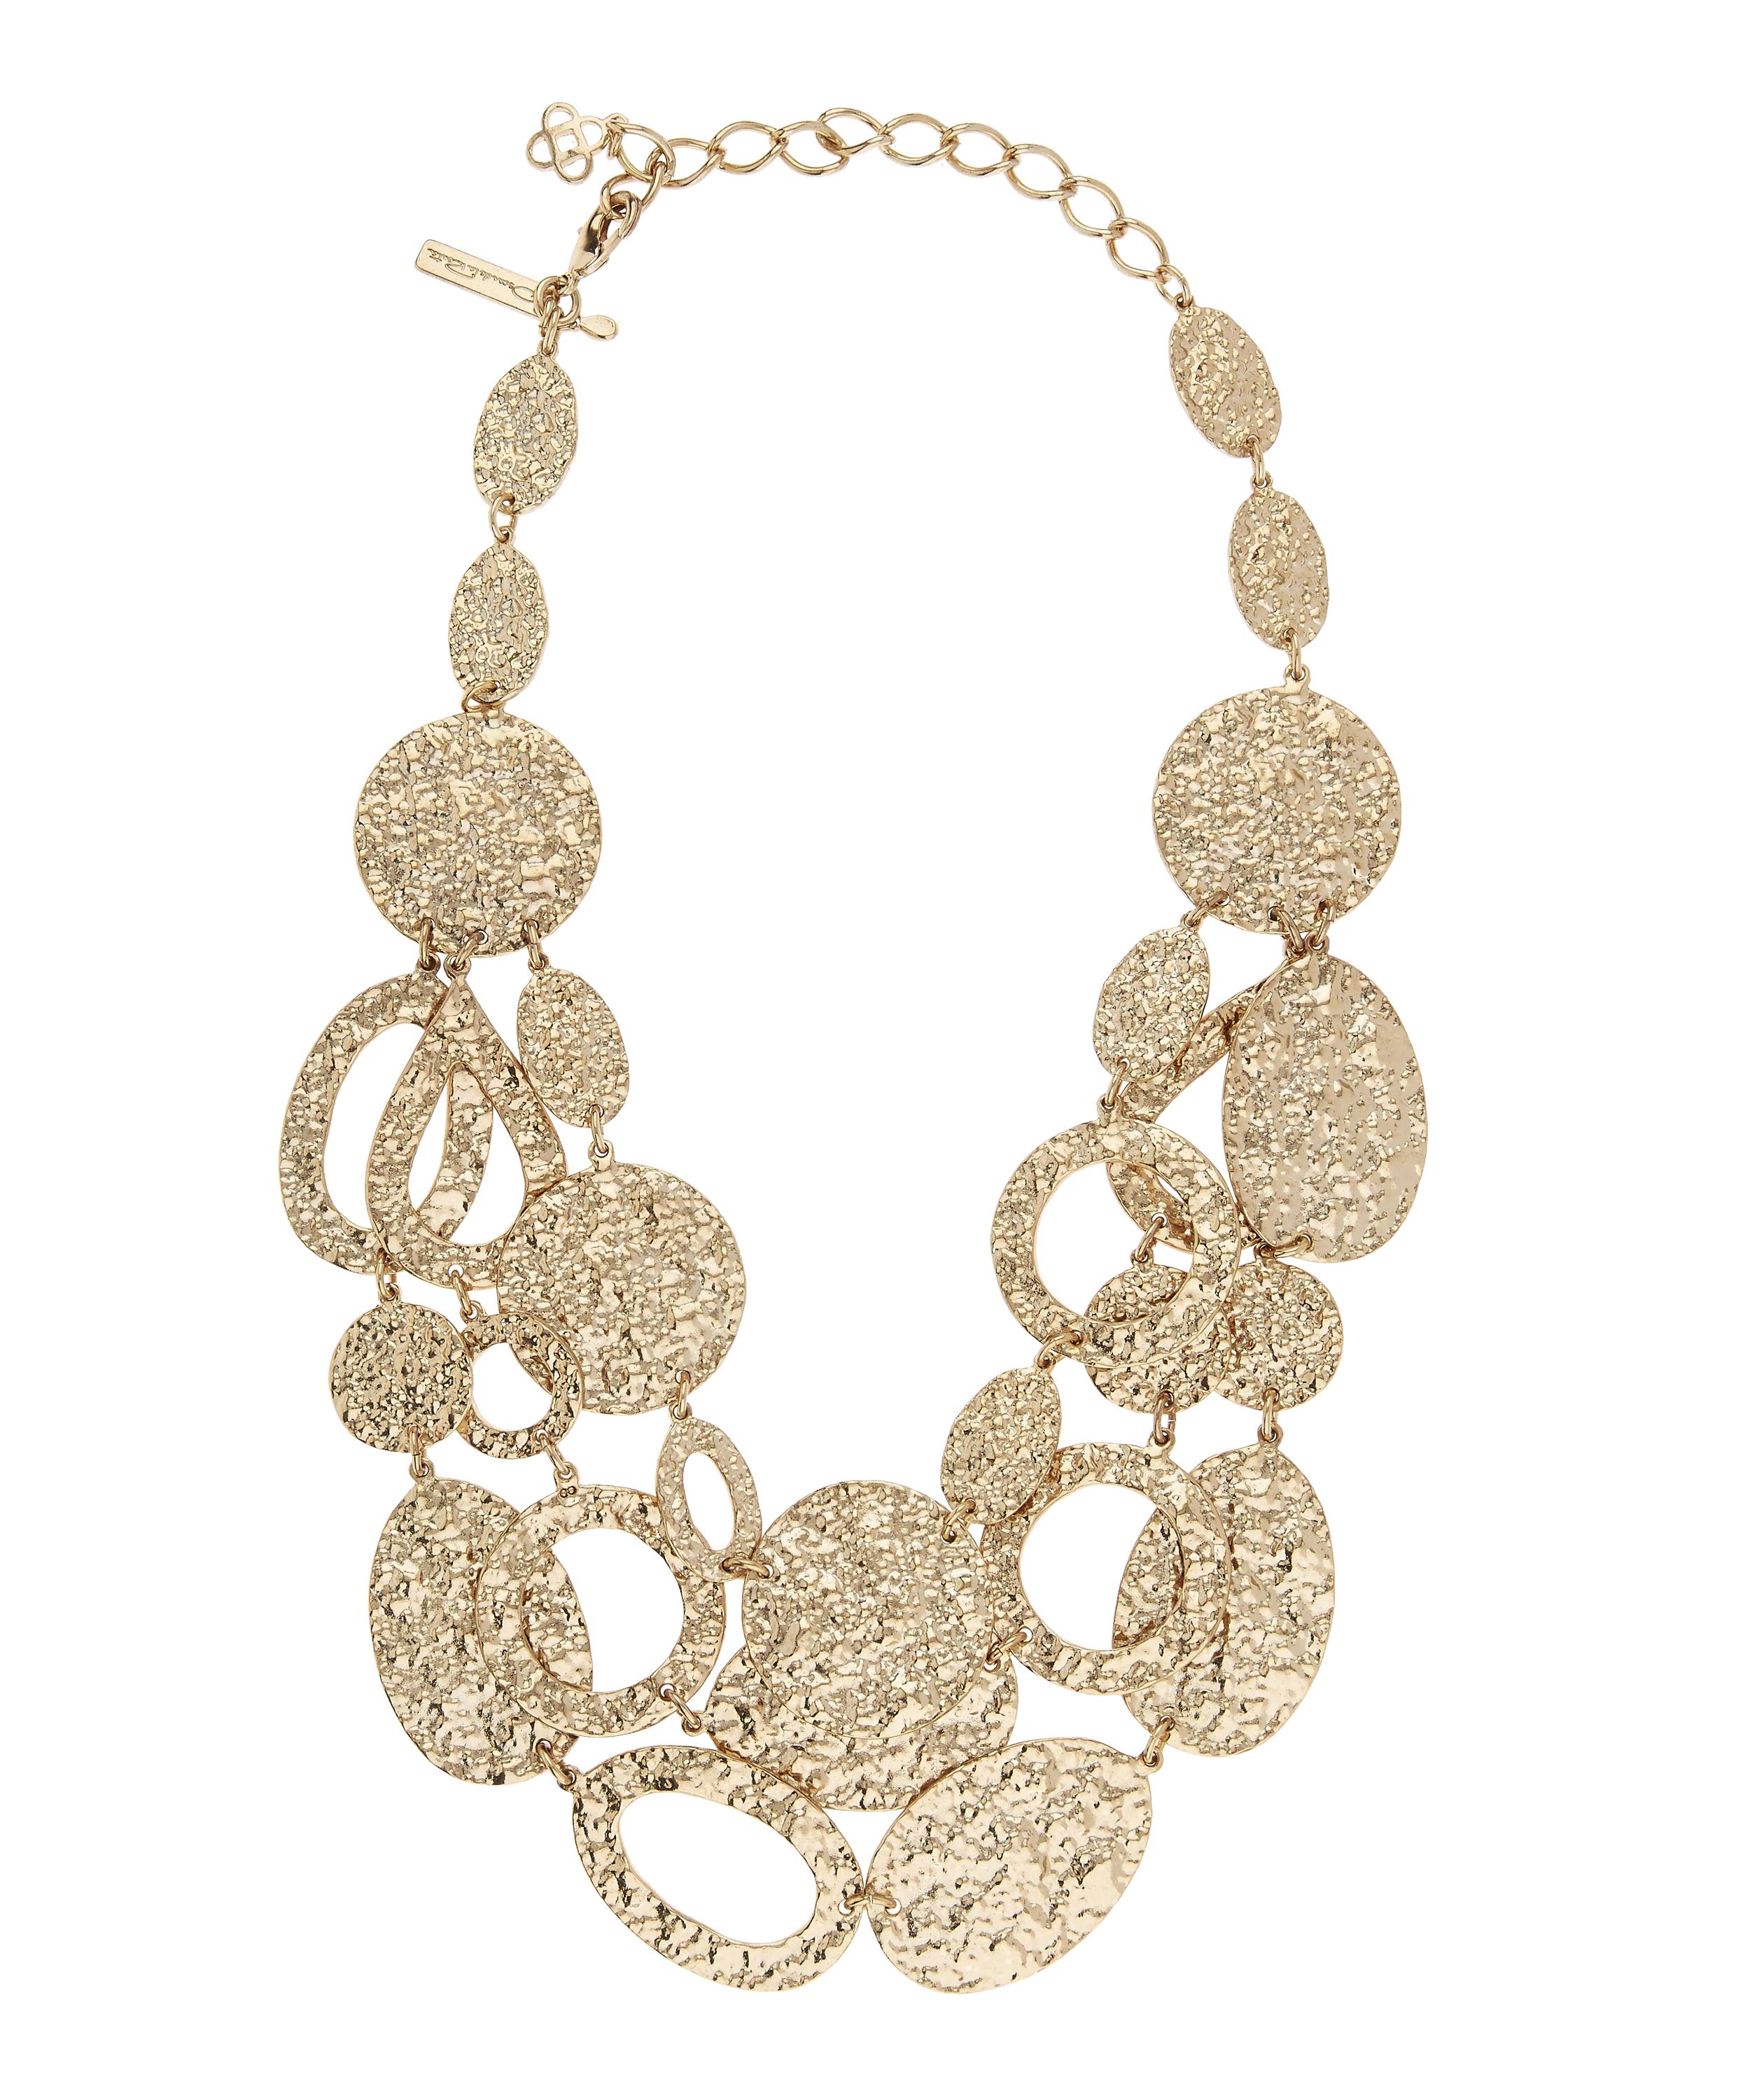 Gold-Plated Hammered Disc Necklace | Liberty London